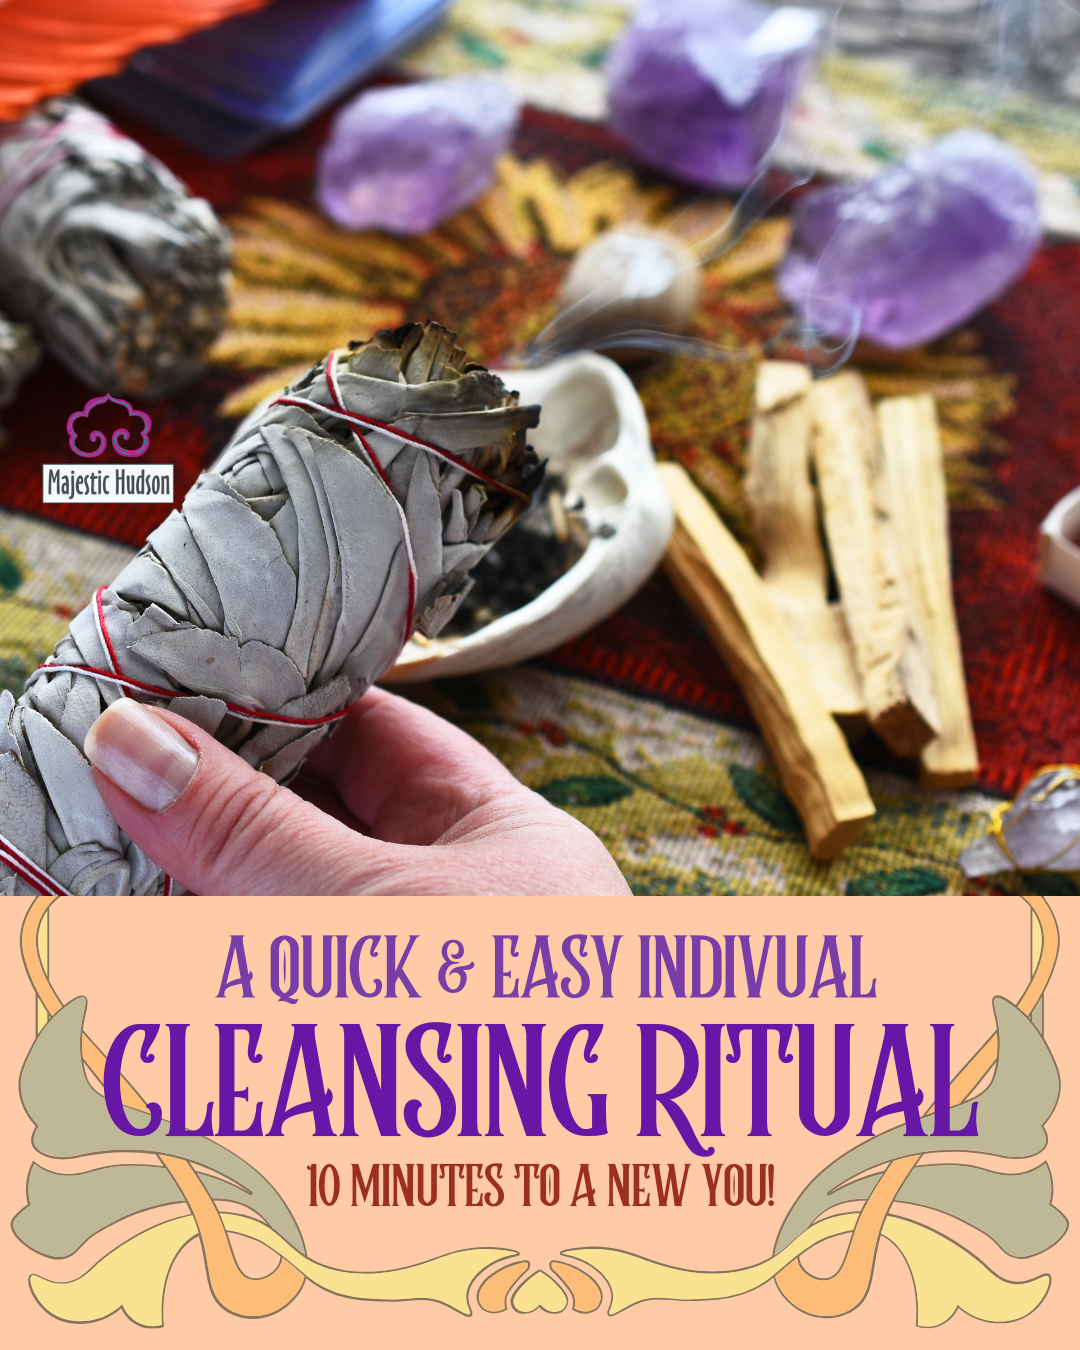 Personal Energy Cleansing Ritual | Quick & Easy!